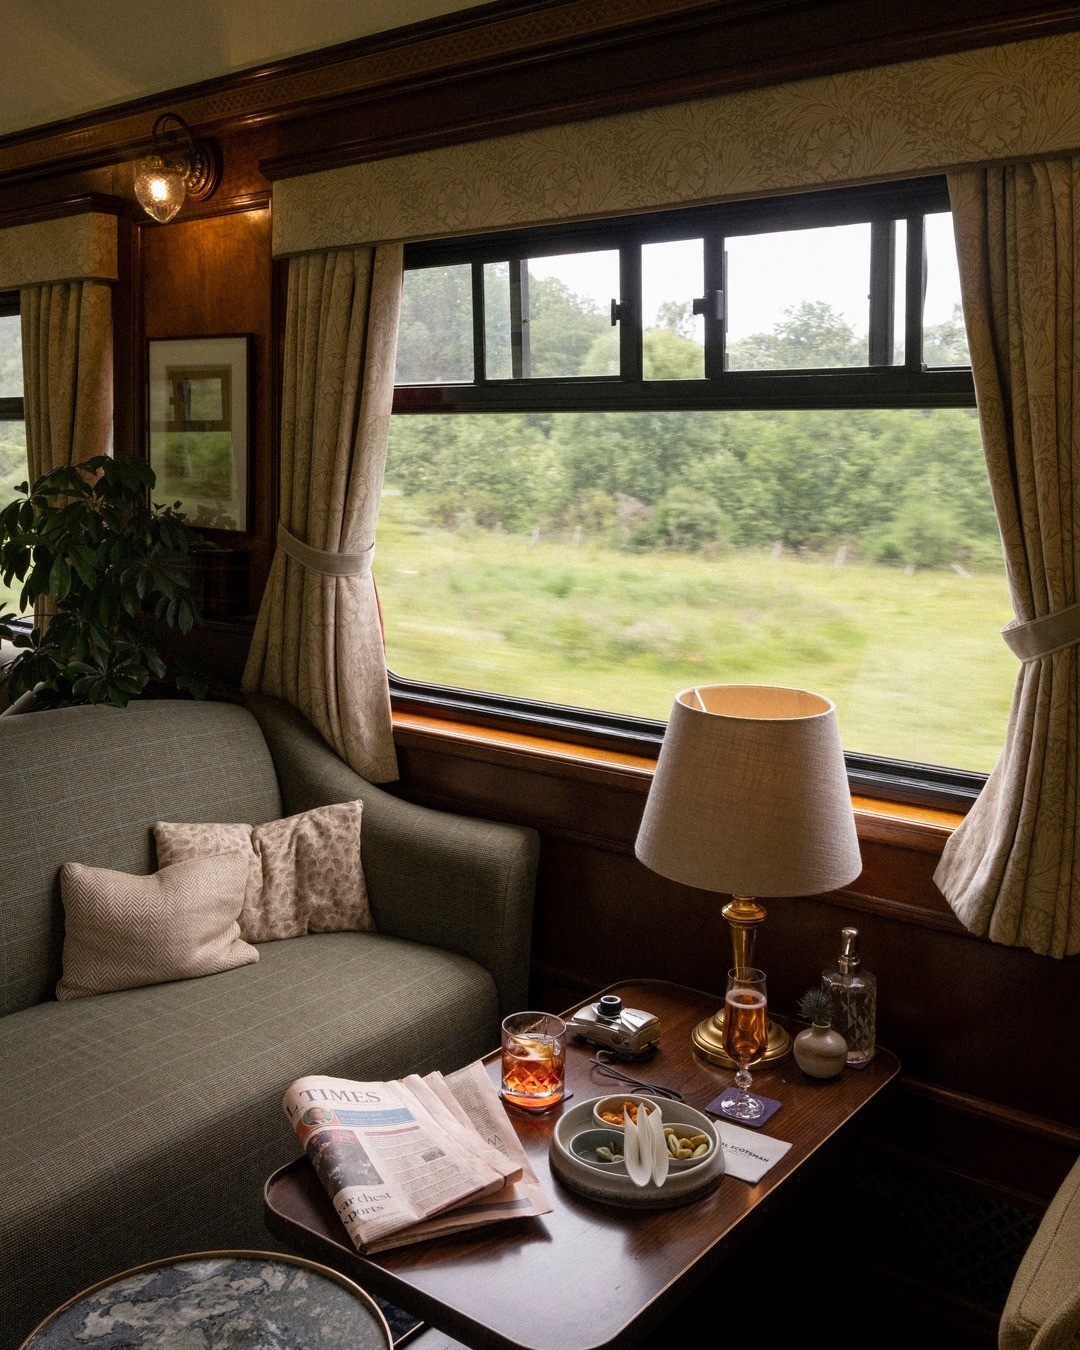 Royal Scotsman train is elegantly furnished and features luxurious amenities. The bedding and linens are of the highest quality, ensuring a comfortable night's sleep.